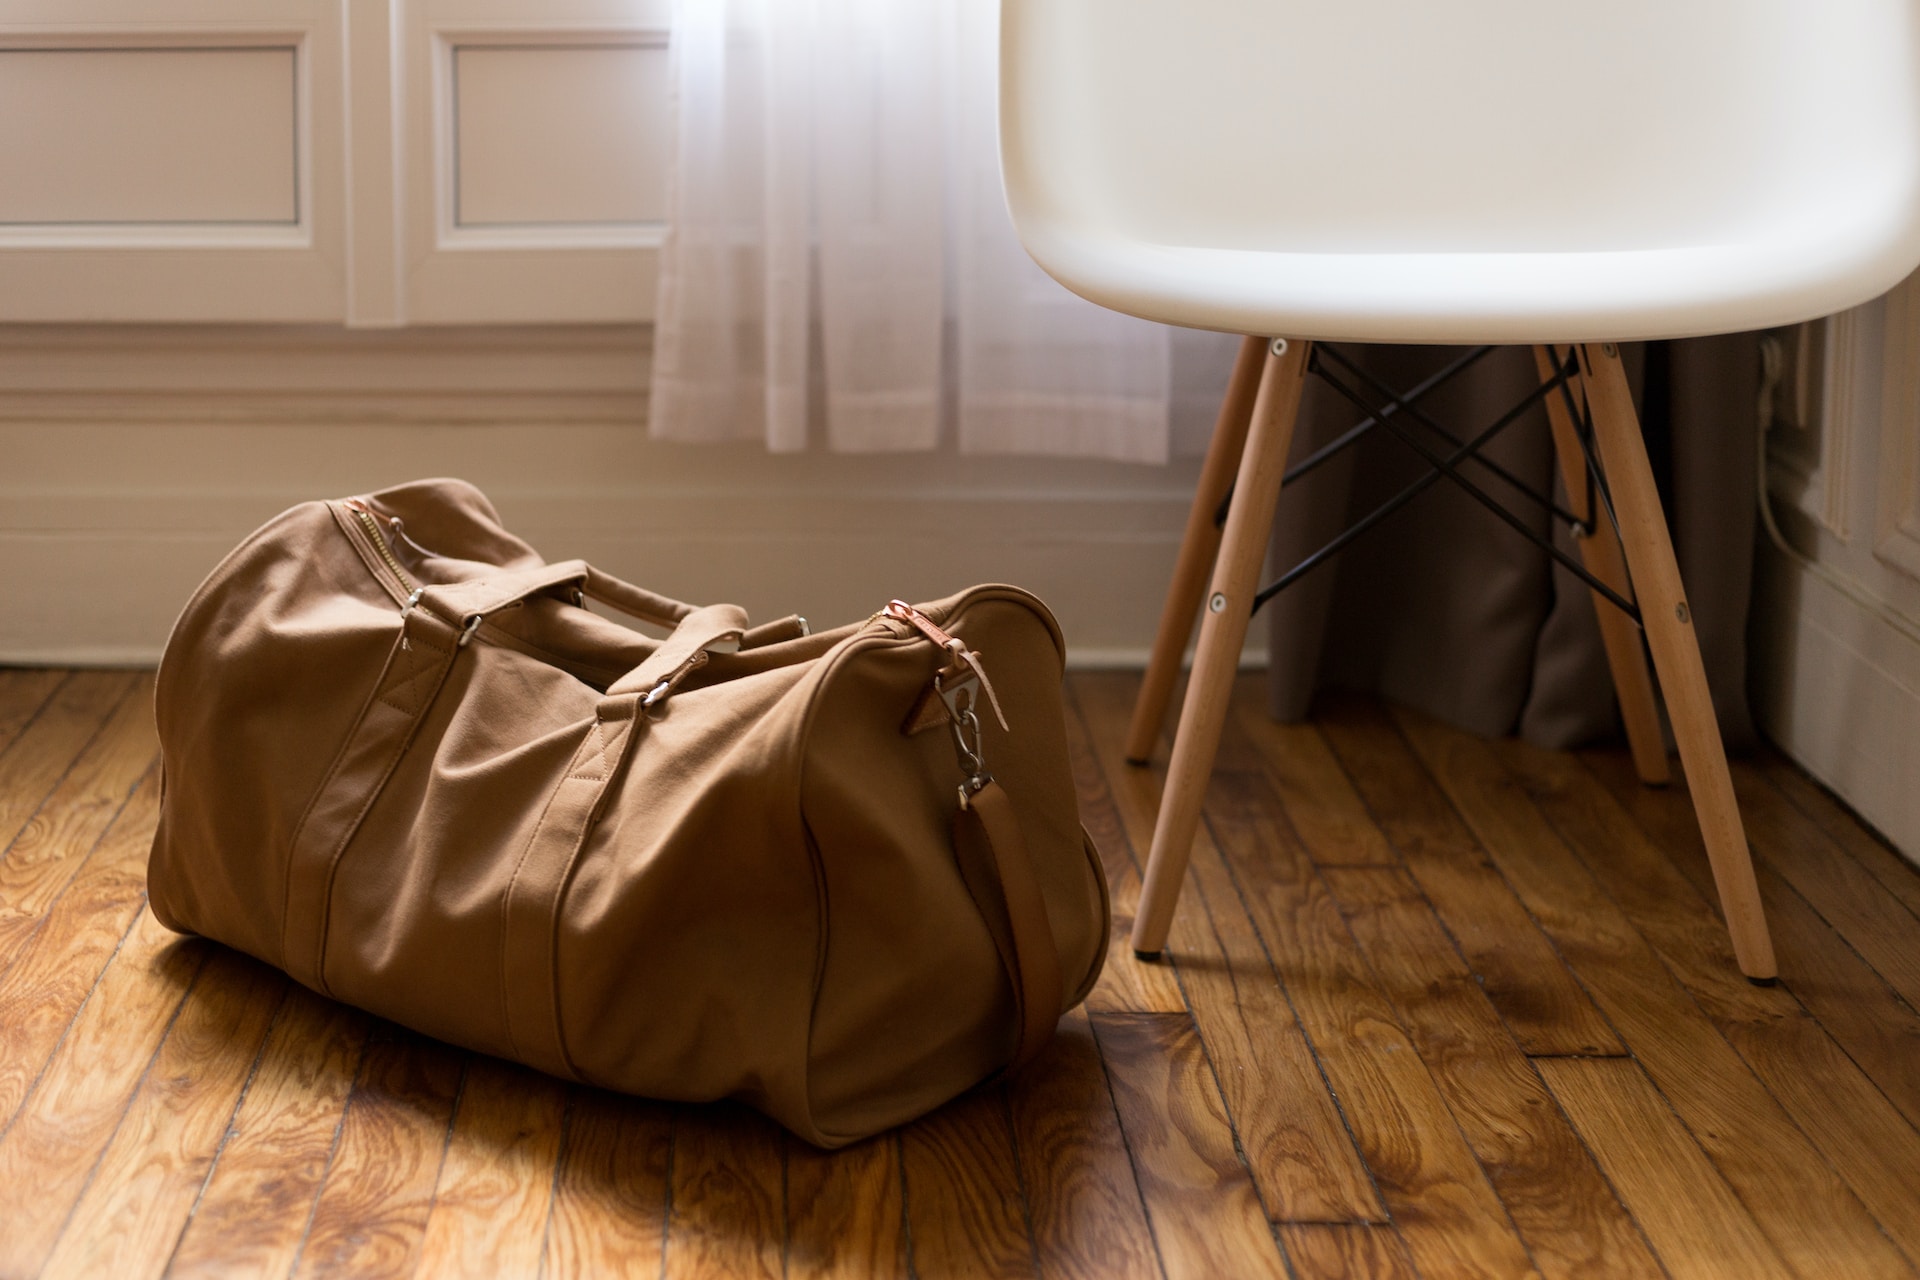 A beige duffle bag sits packed next to a chair